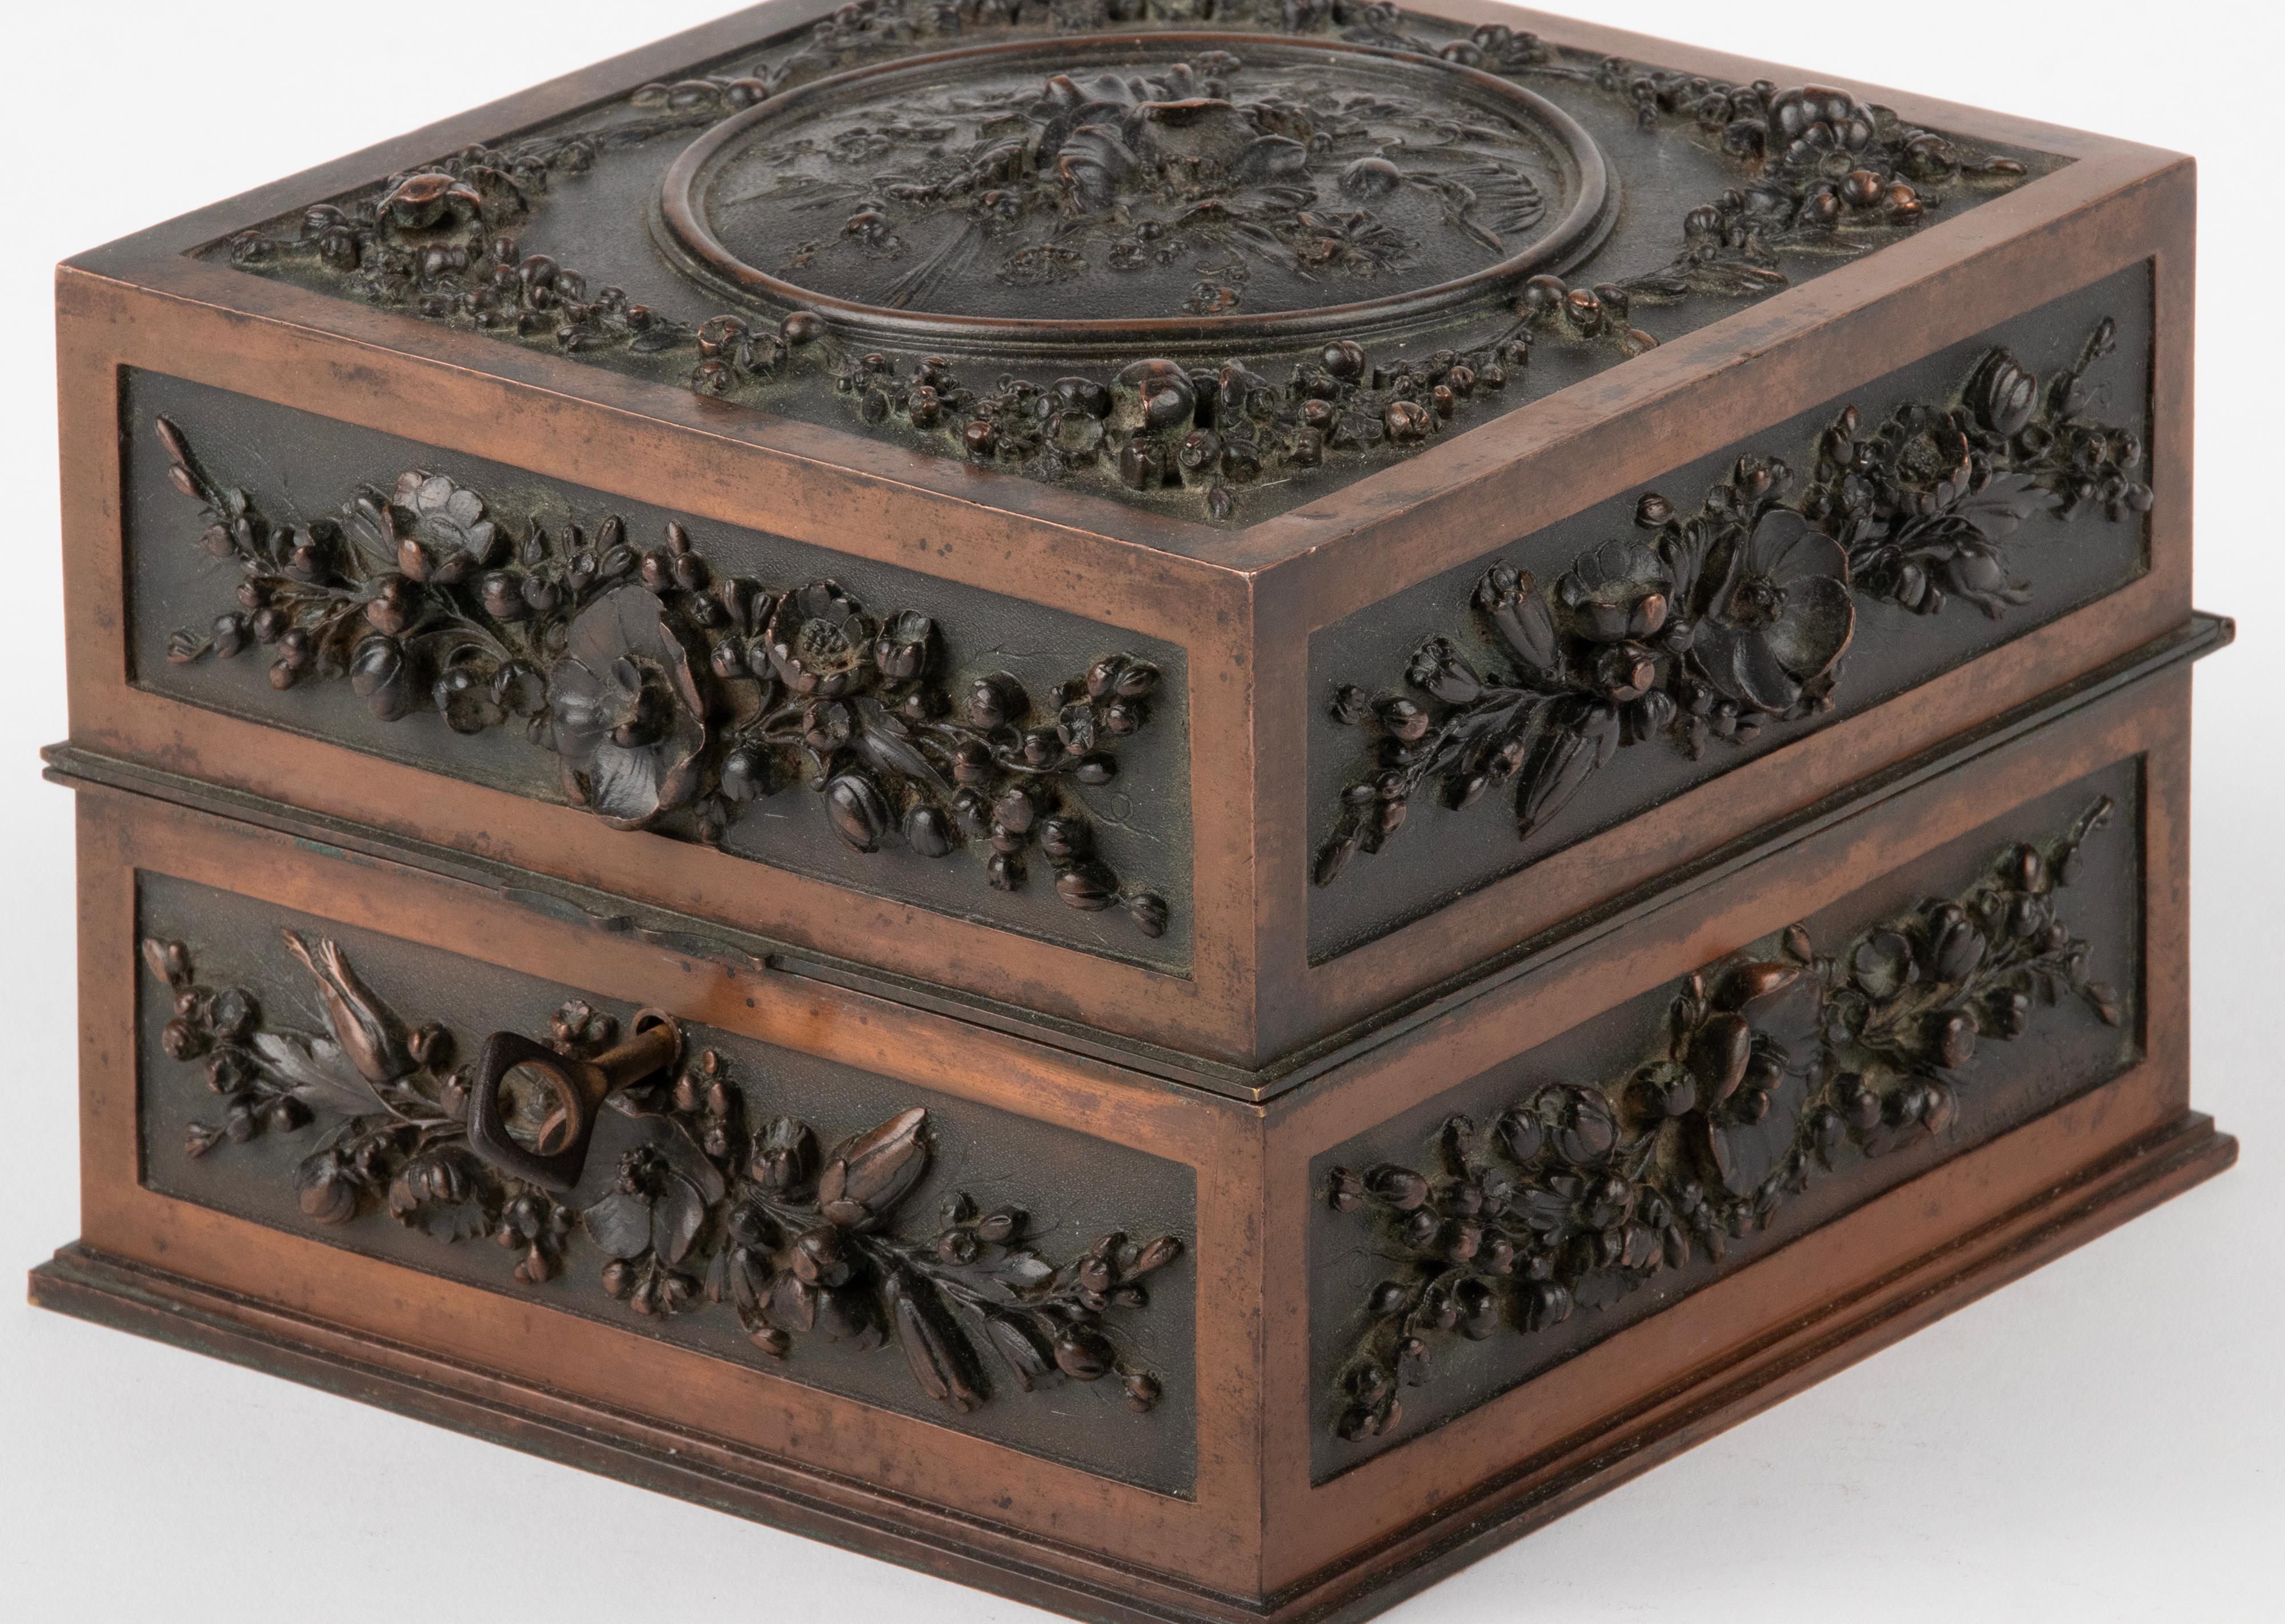 Late 19th Century Black Forest Bronze Decorative Box by Leopold Oudry & Cie. For Sale 5